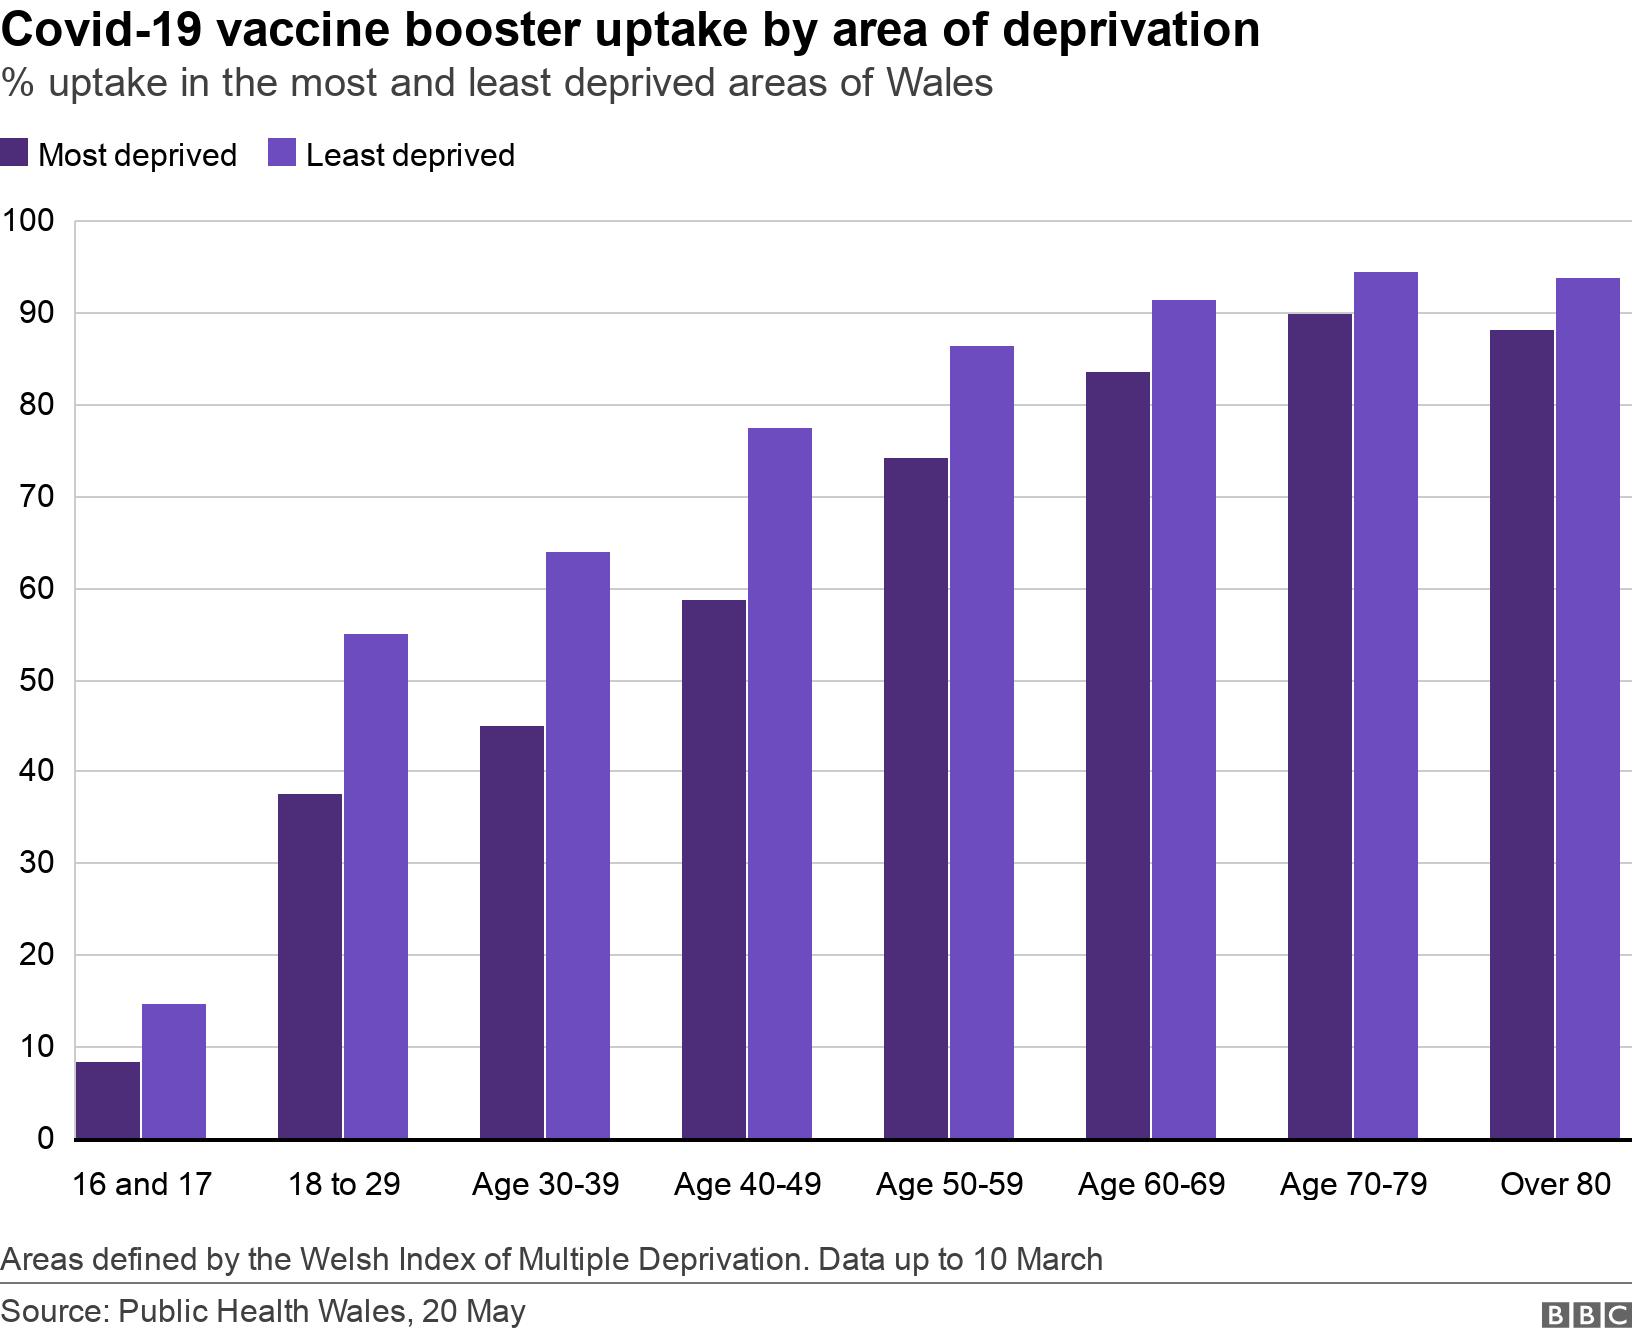 Covid-19 vaccine booster uptake by area of deprivation. % uptake in the most and least deprived areas of Wales.  Areas defined by the Welsh Index of Multiple Deprivation. Data up to 10 March.